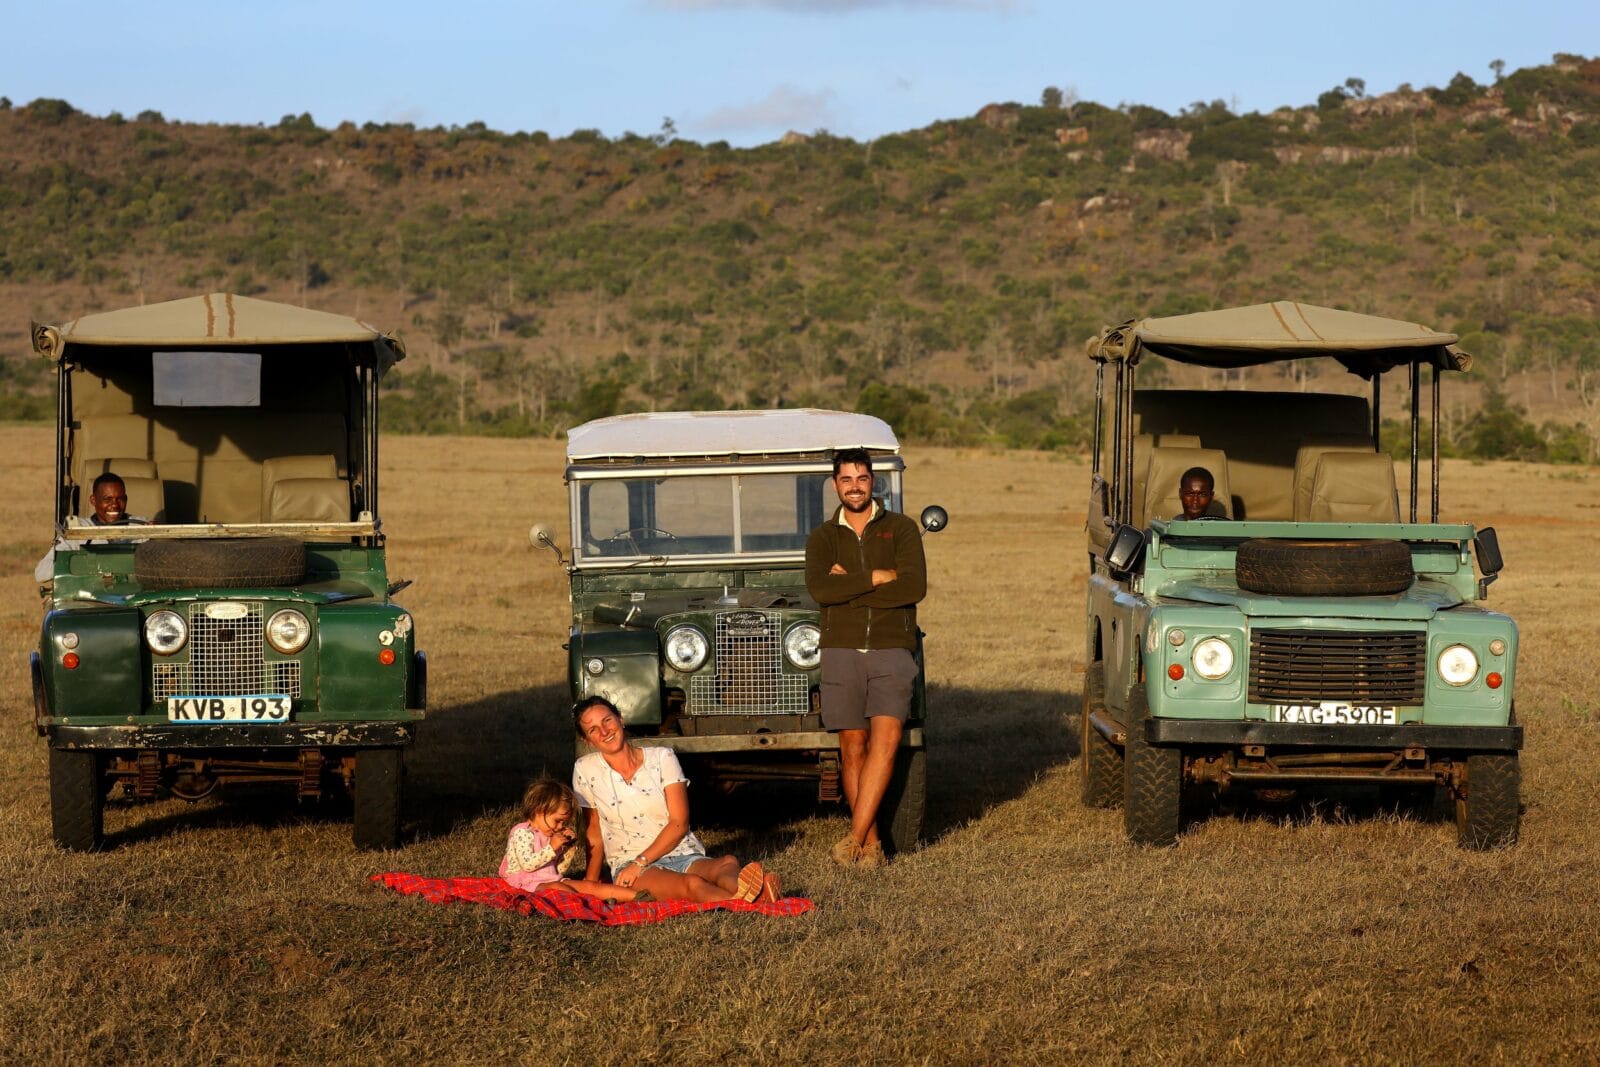 The Hough family & team members, with their three Land Rover vehicles, Kenya